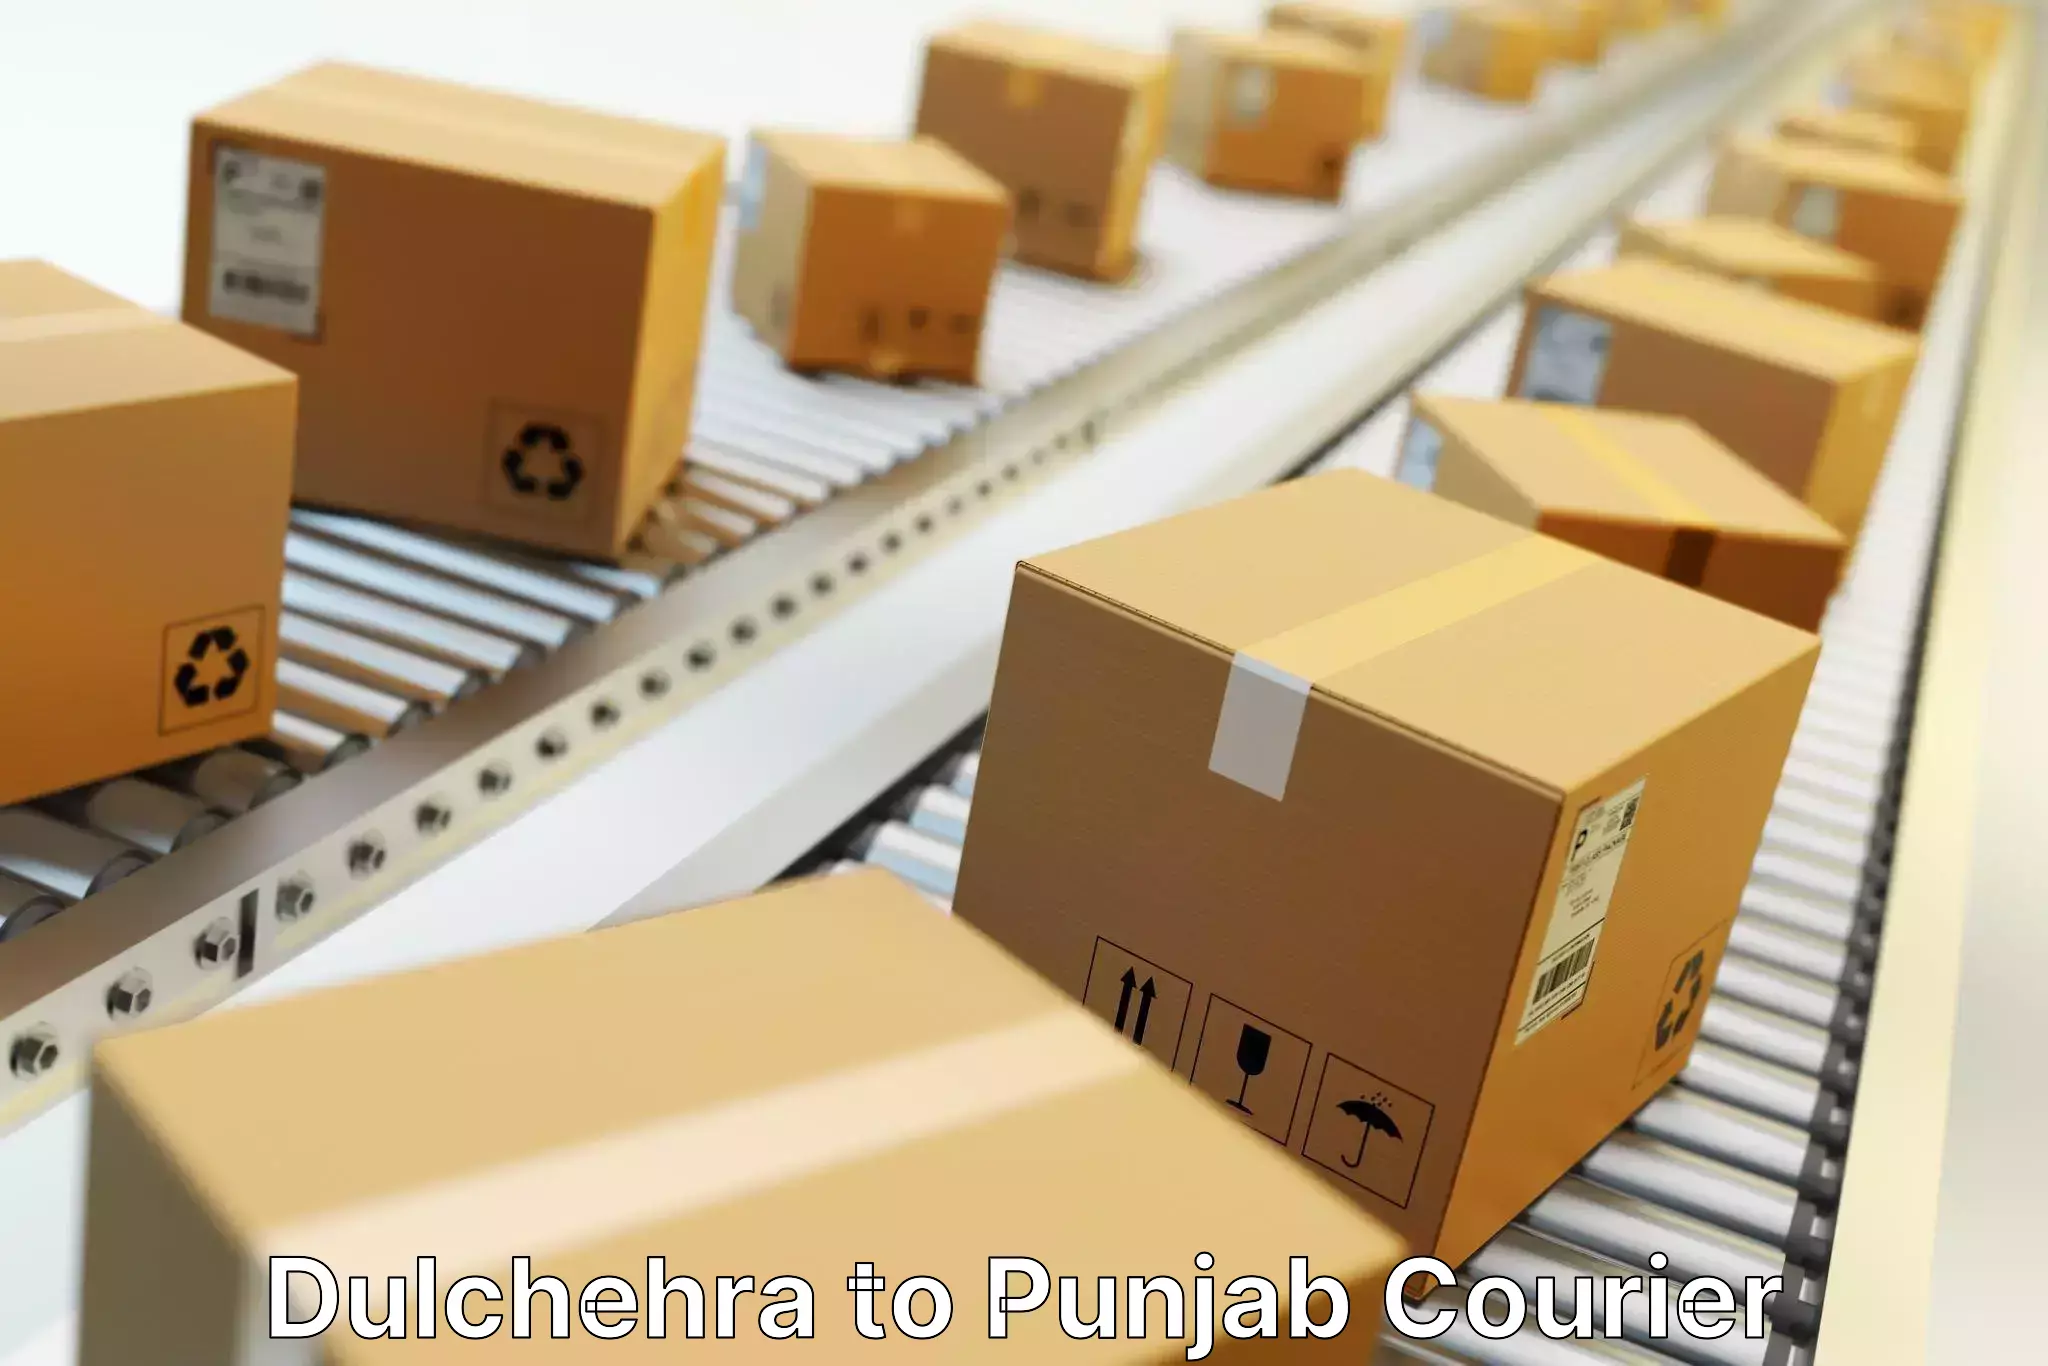 Comprehensive shipping network in Dulchehra to Amritsar